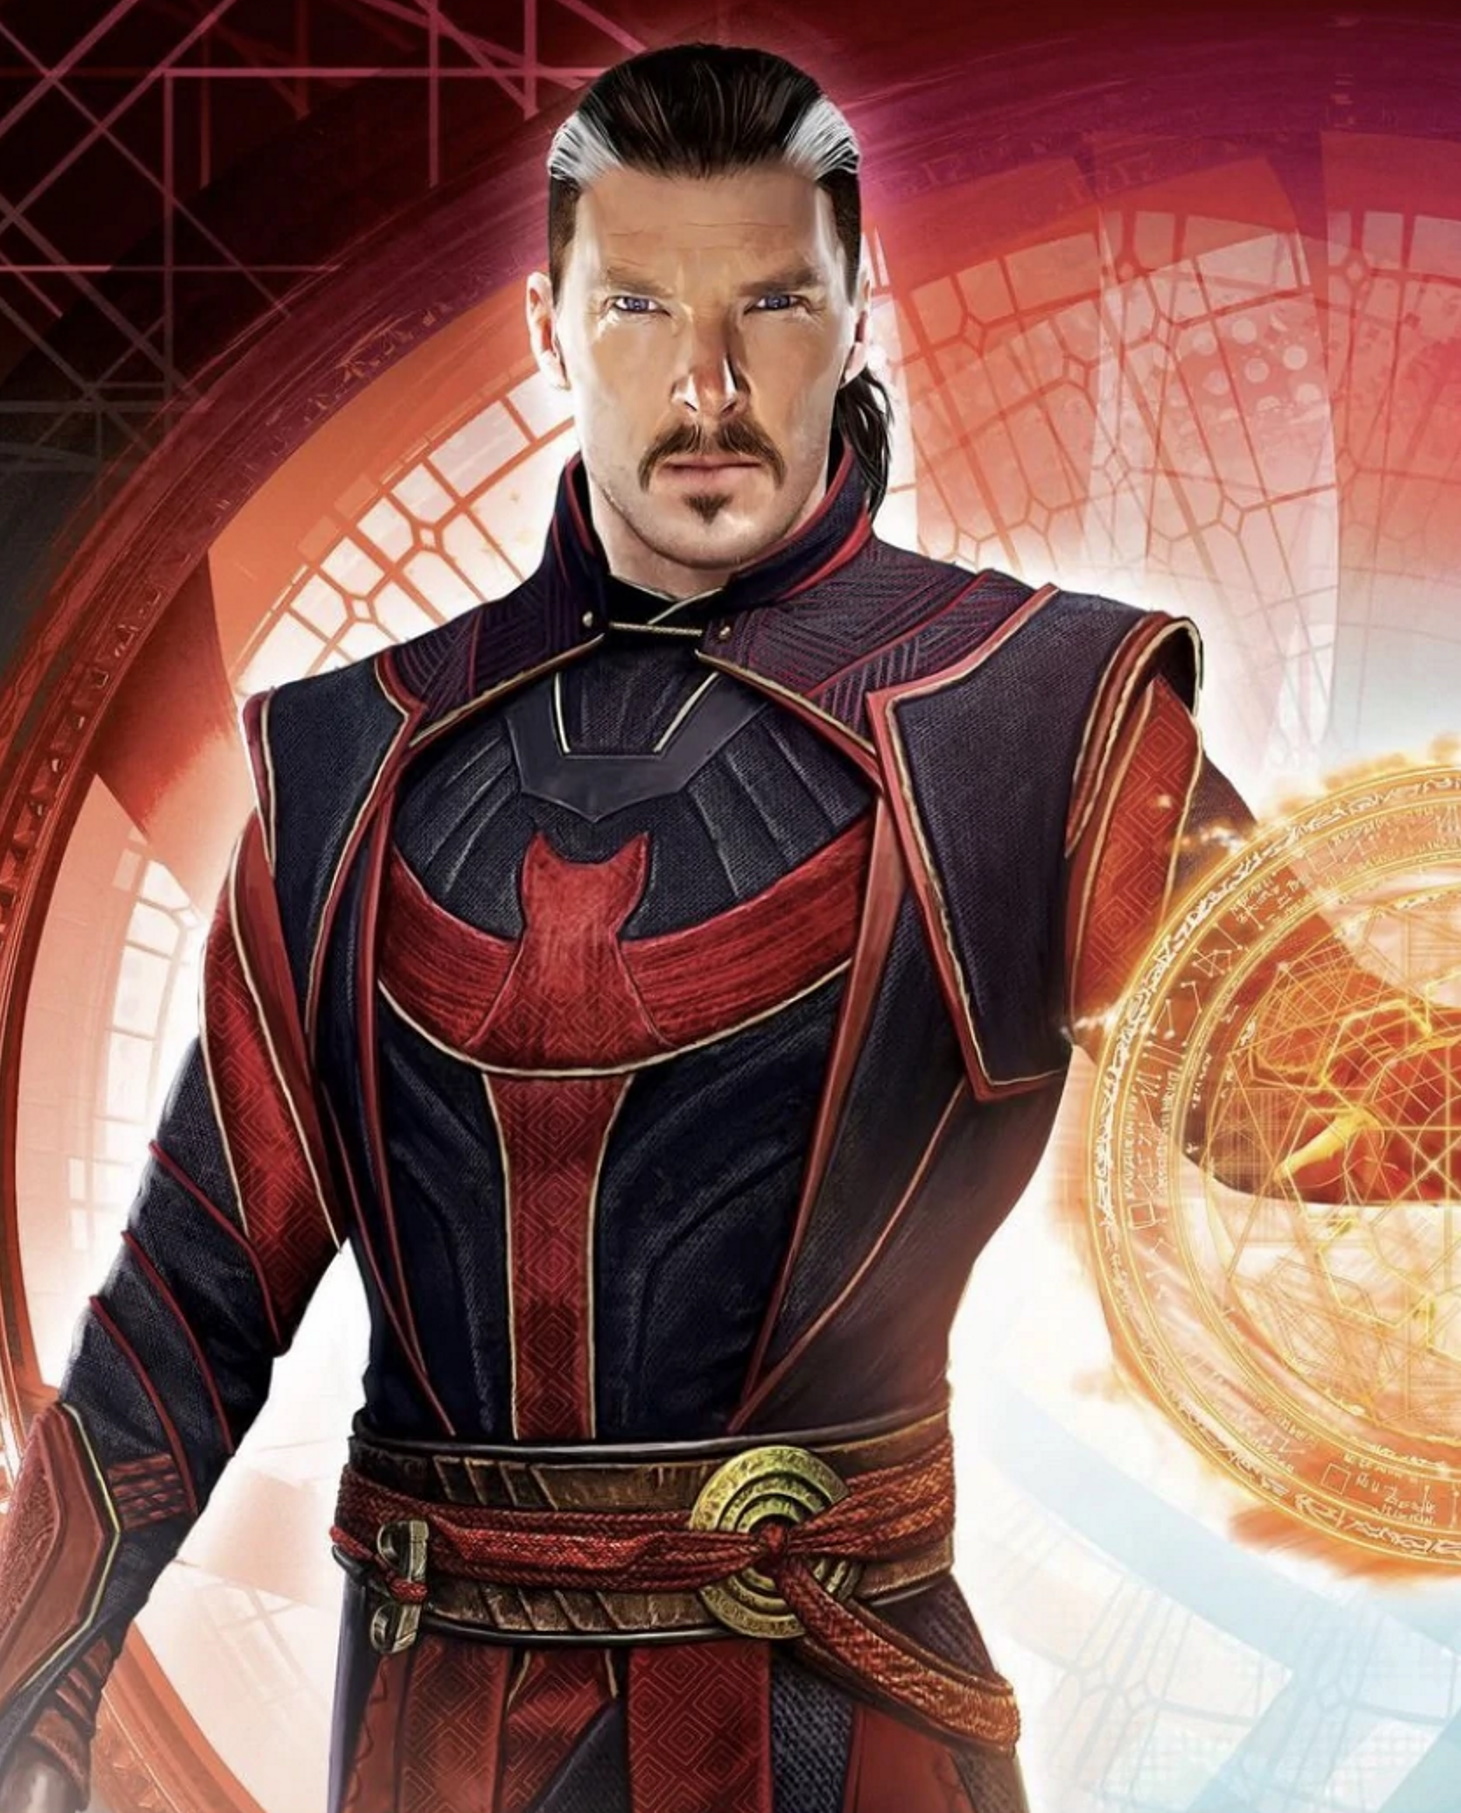 Doctor Strange in the Multiverse of Madness, Marvel Cinematic Universe Wiki